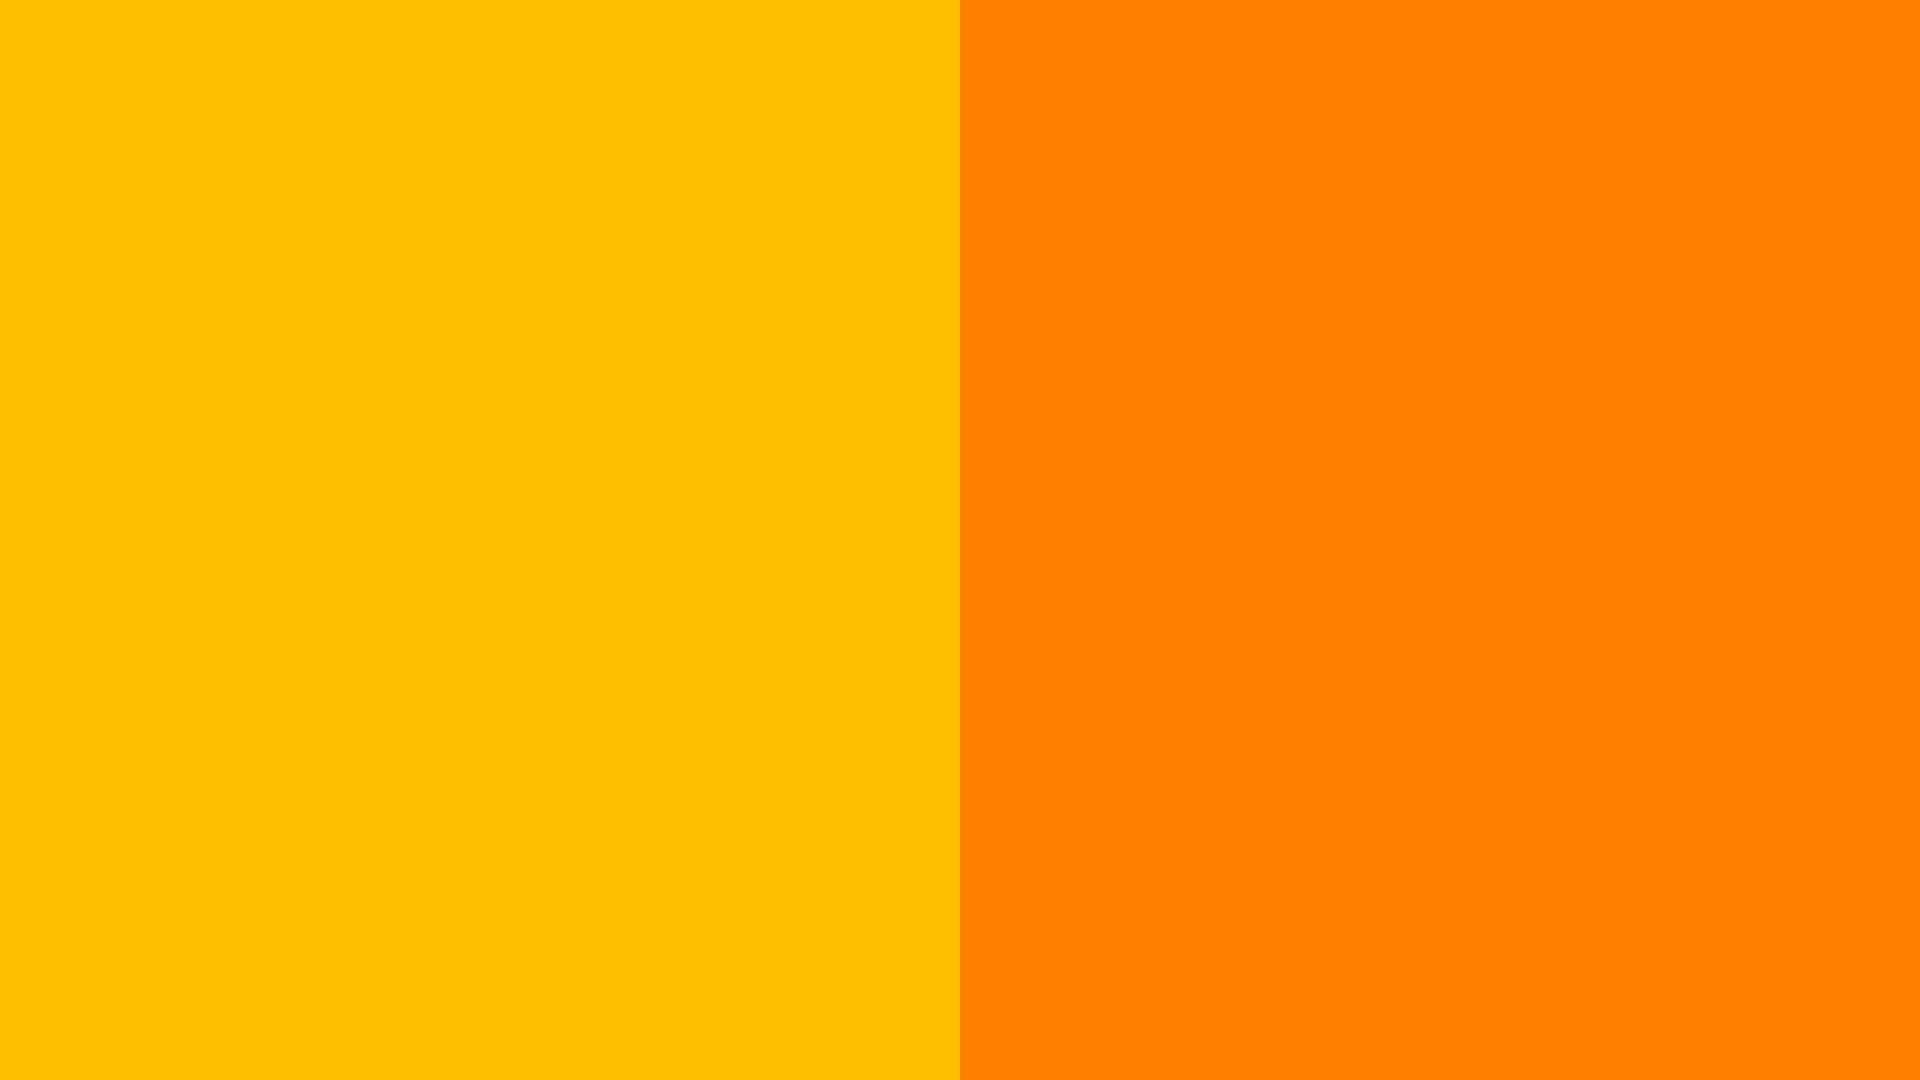 Solid Yellow And Orange Colors Wallpaper